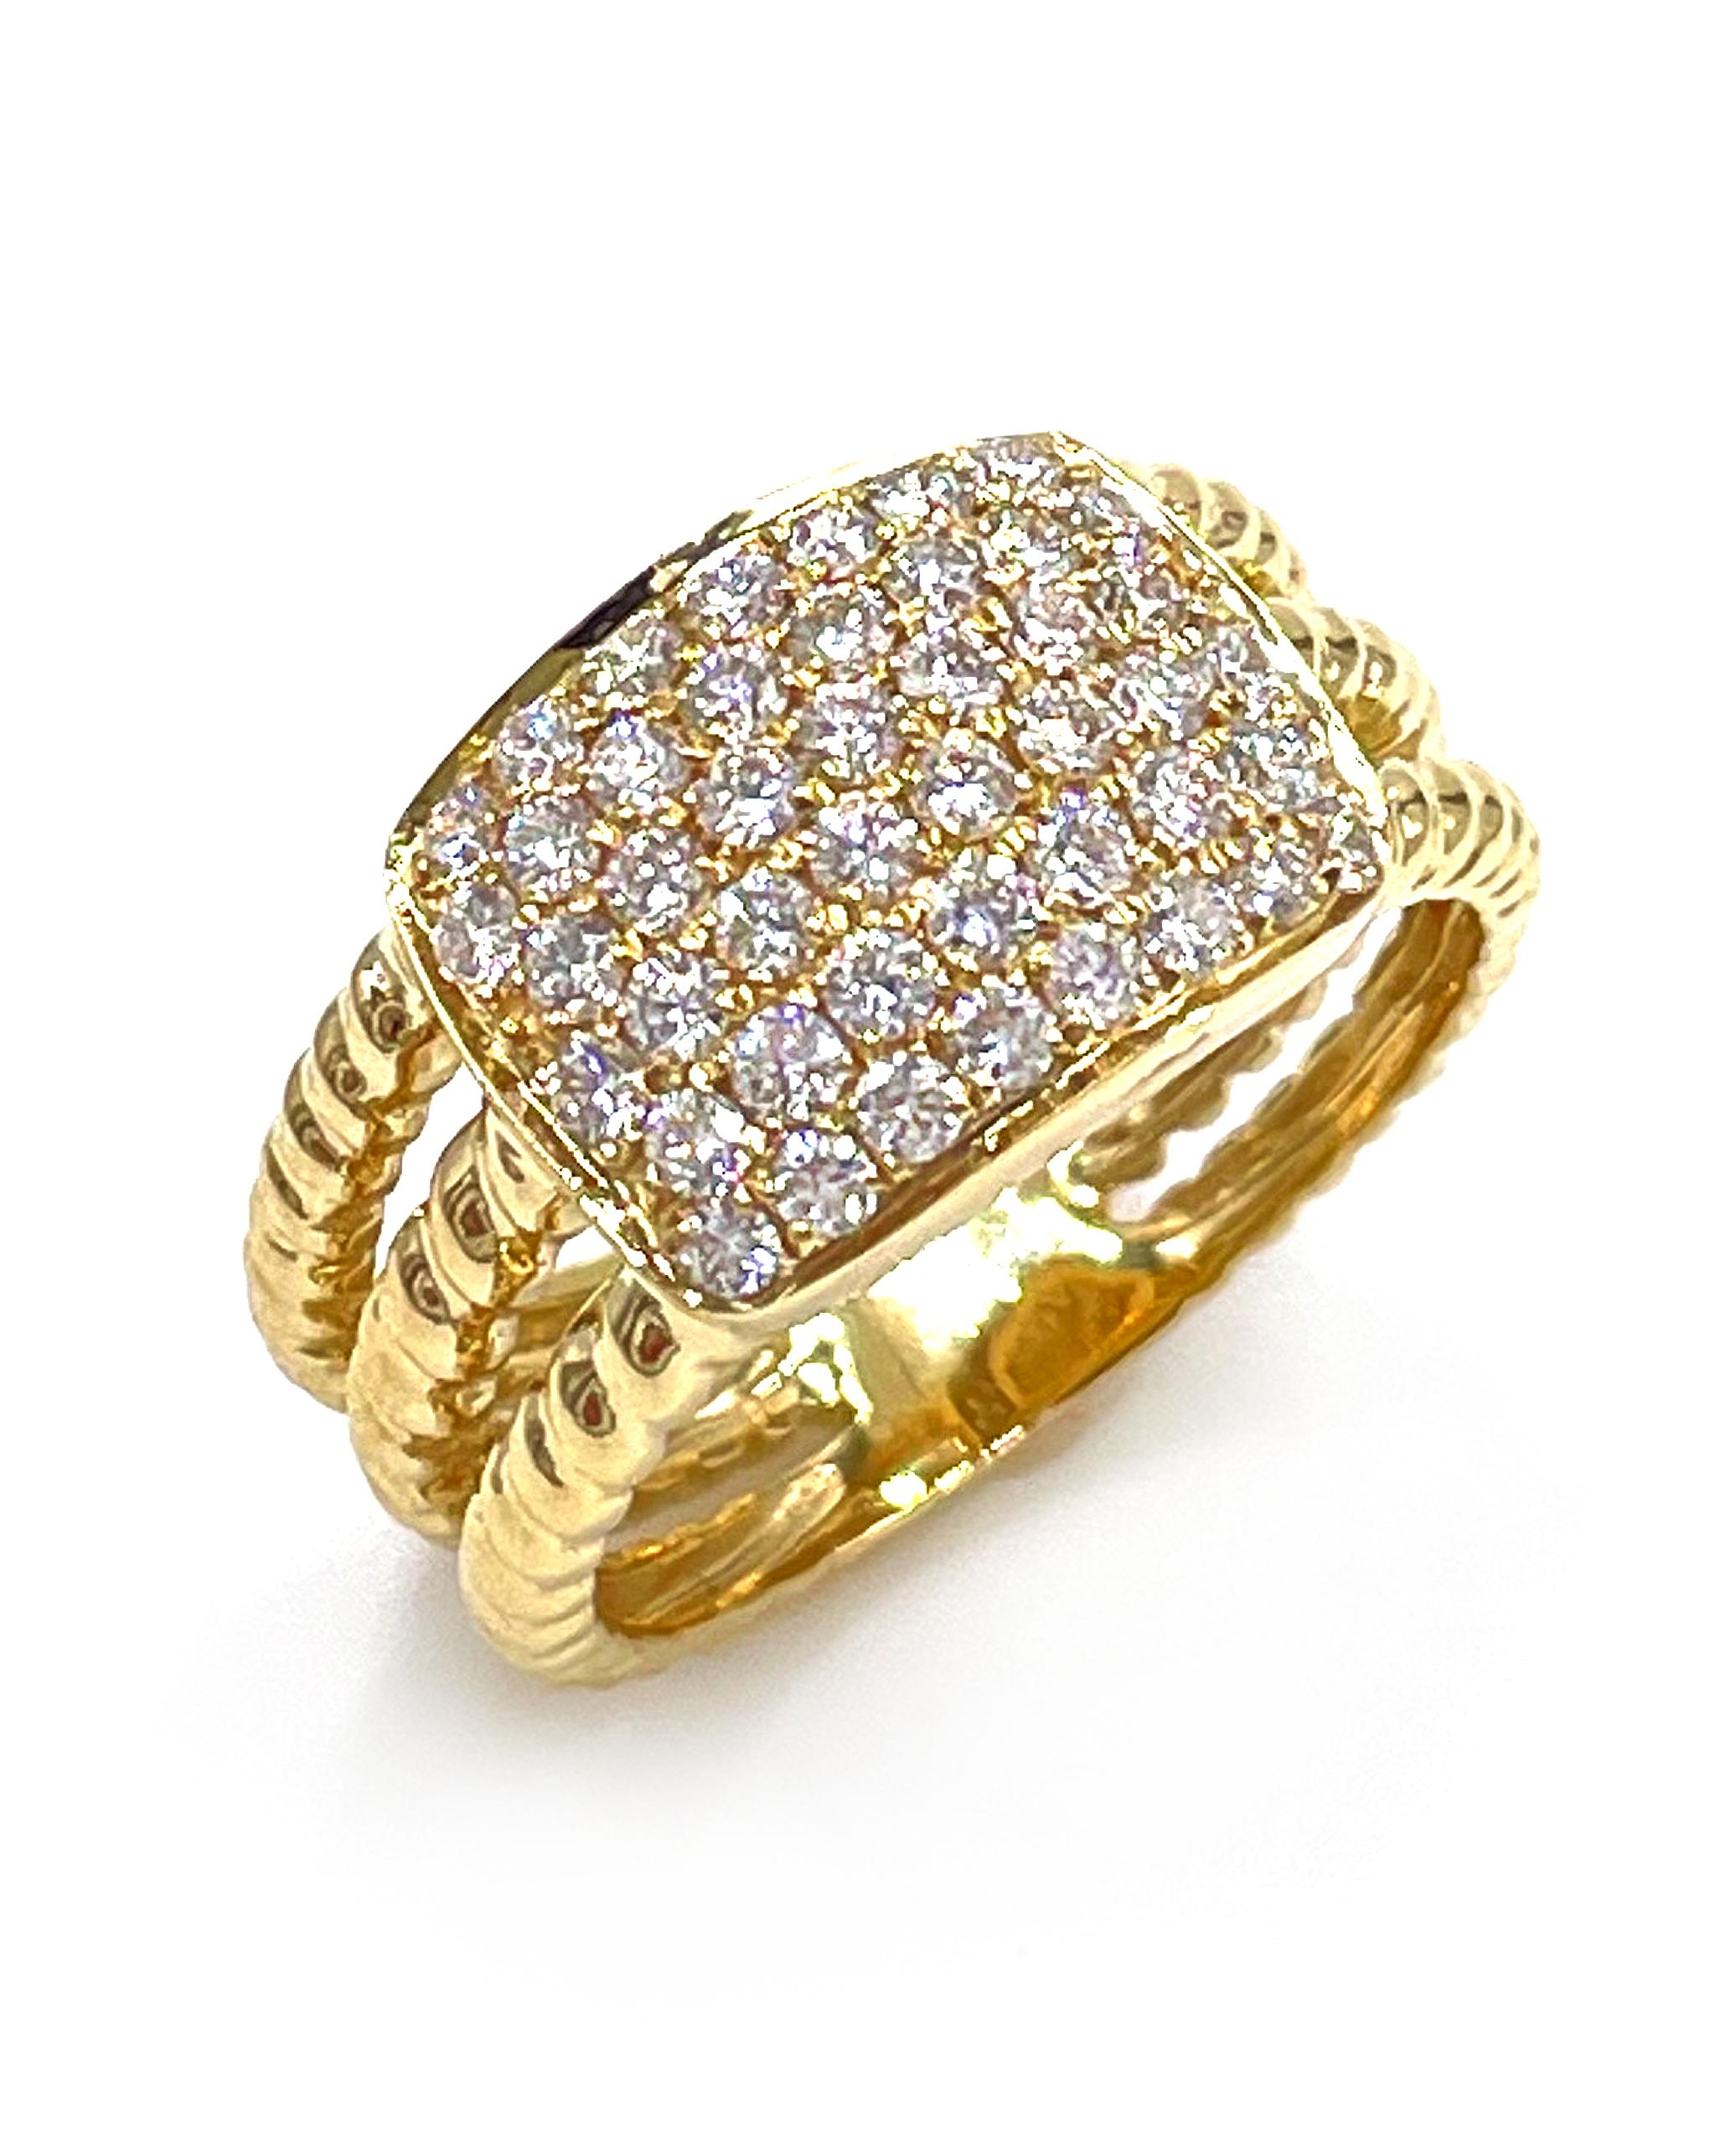 18K yellow gold ring with 3 rows of rope detail. In the center a rectangular shape paveed with round brilliant-cut diamonds 0.81 carats total.

- Diamonds ae G/H color, VS2/SI1 clarity
- The top of the ring measures 10.8mm wide and tapers down to